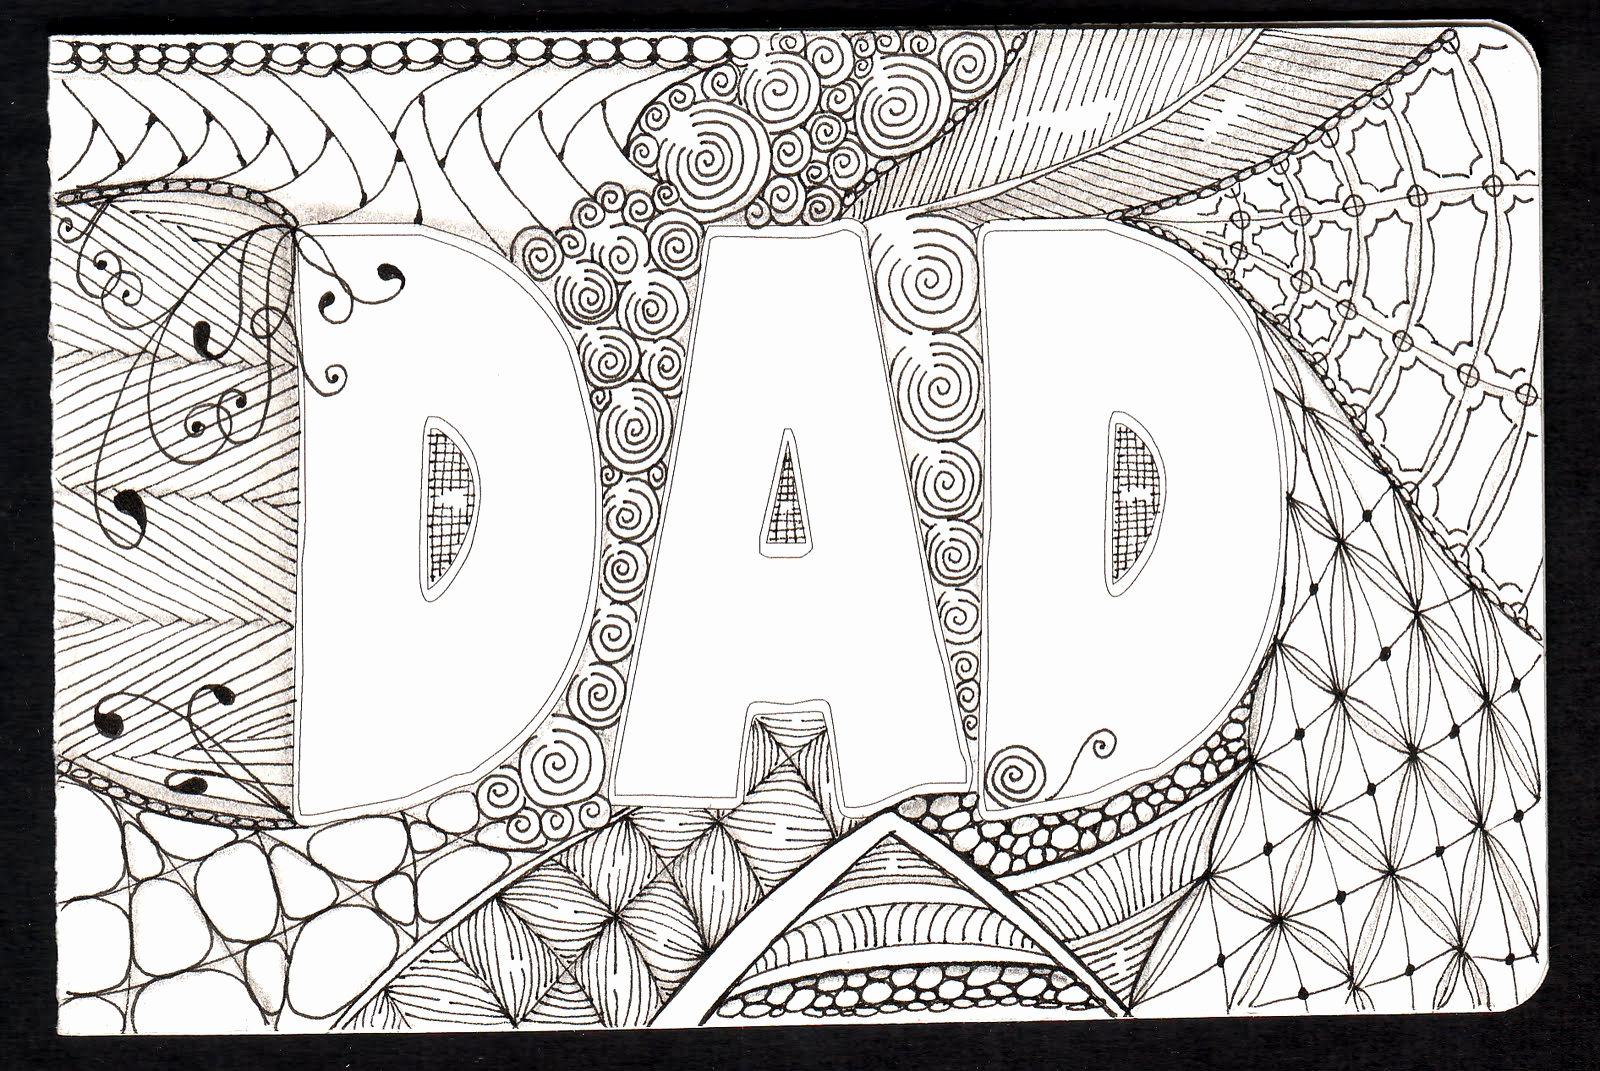 Cards For Dads Birthday Ideas Cards For Dads Birthday Ideas Beautiful Birthday Card Ideas For Dad